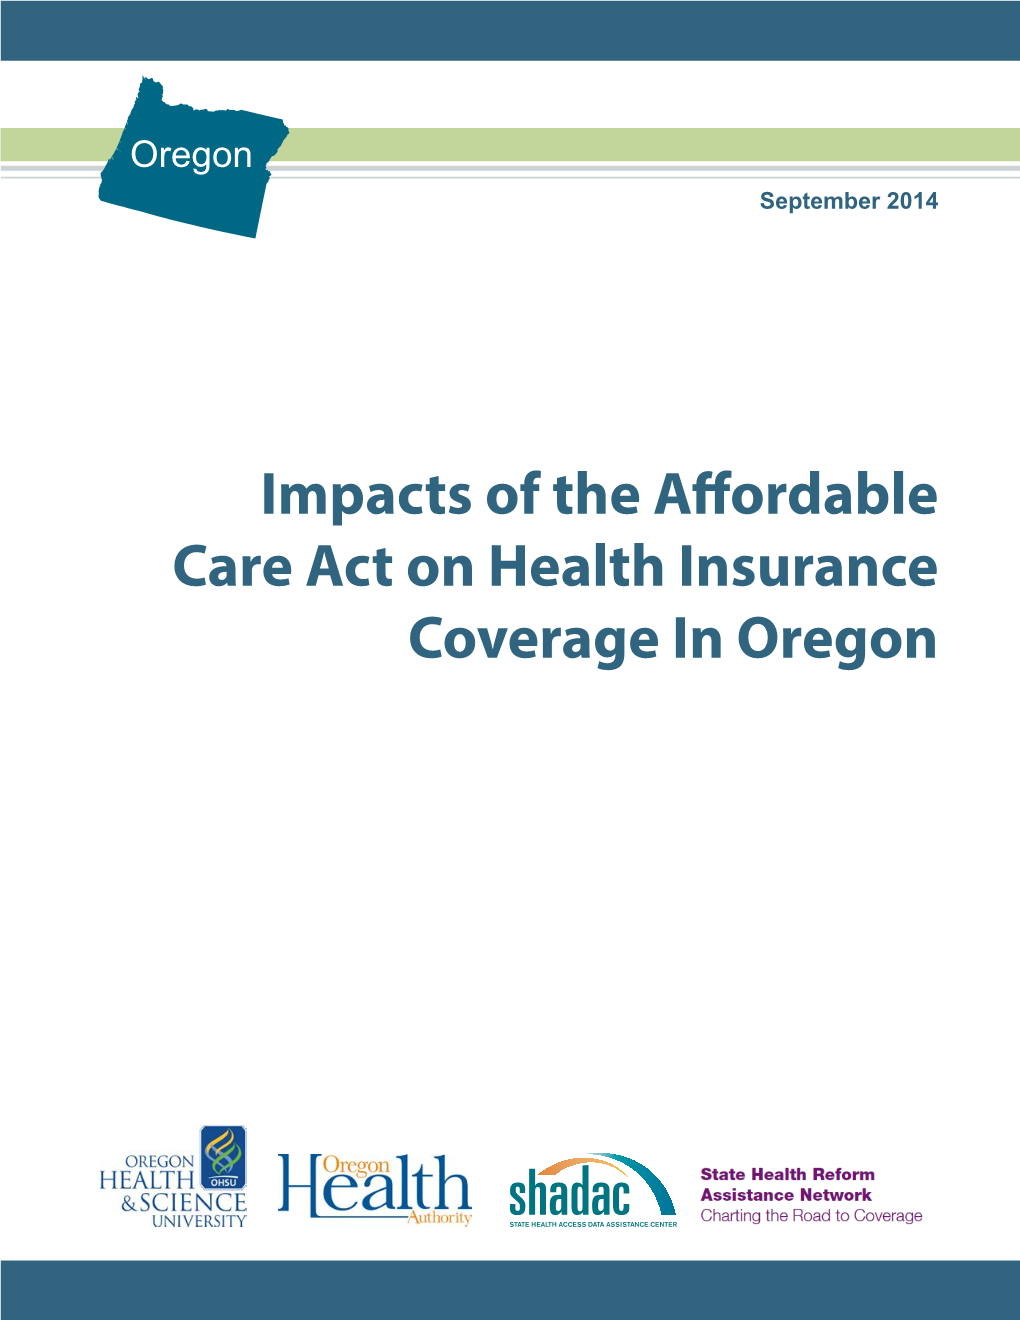 Impacts of the Affordable Care Act on Health Insurance Coverage in Oregon